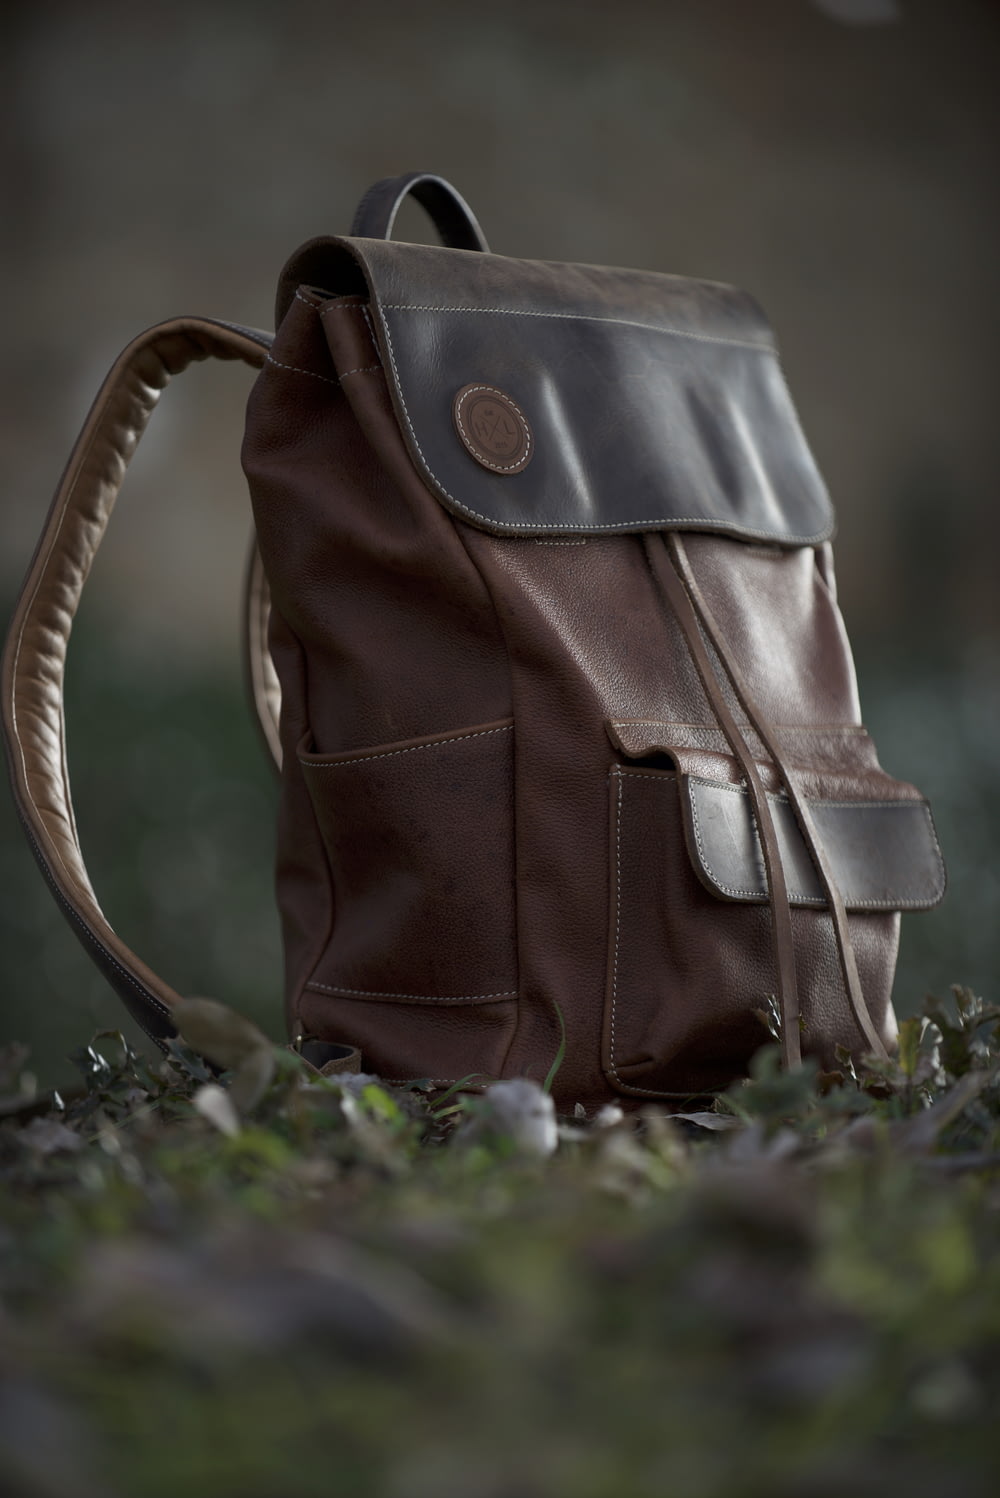 brown and black leather backpack on ground